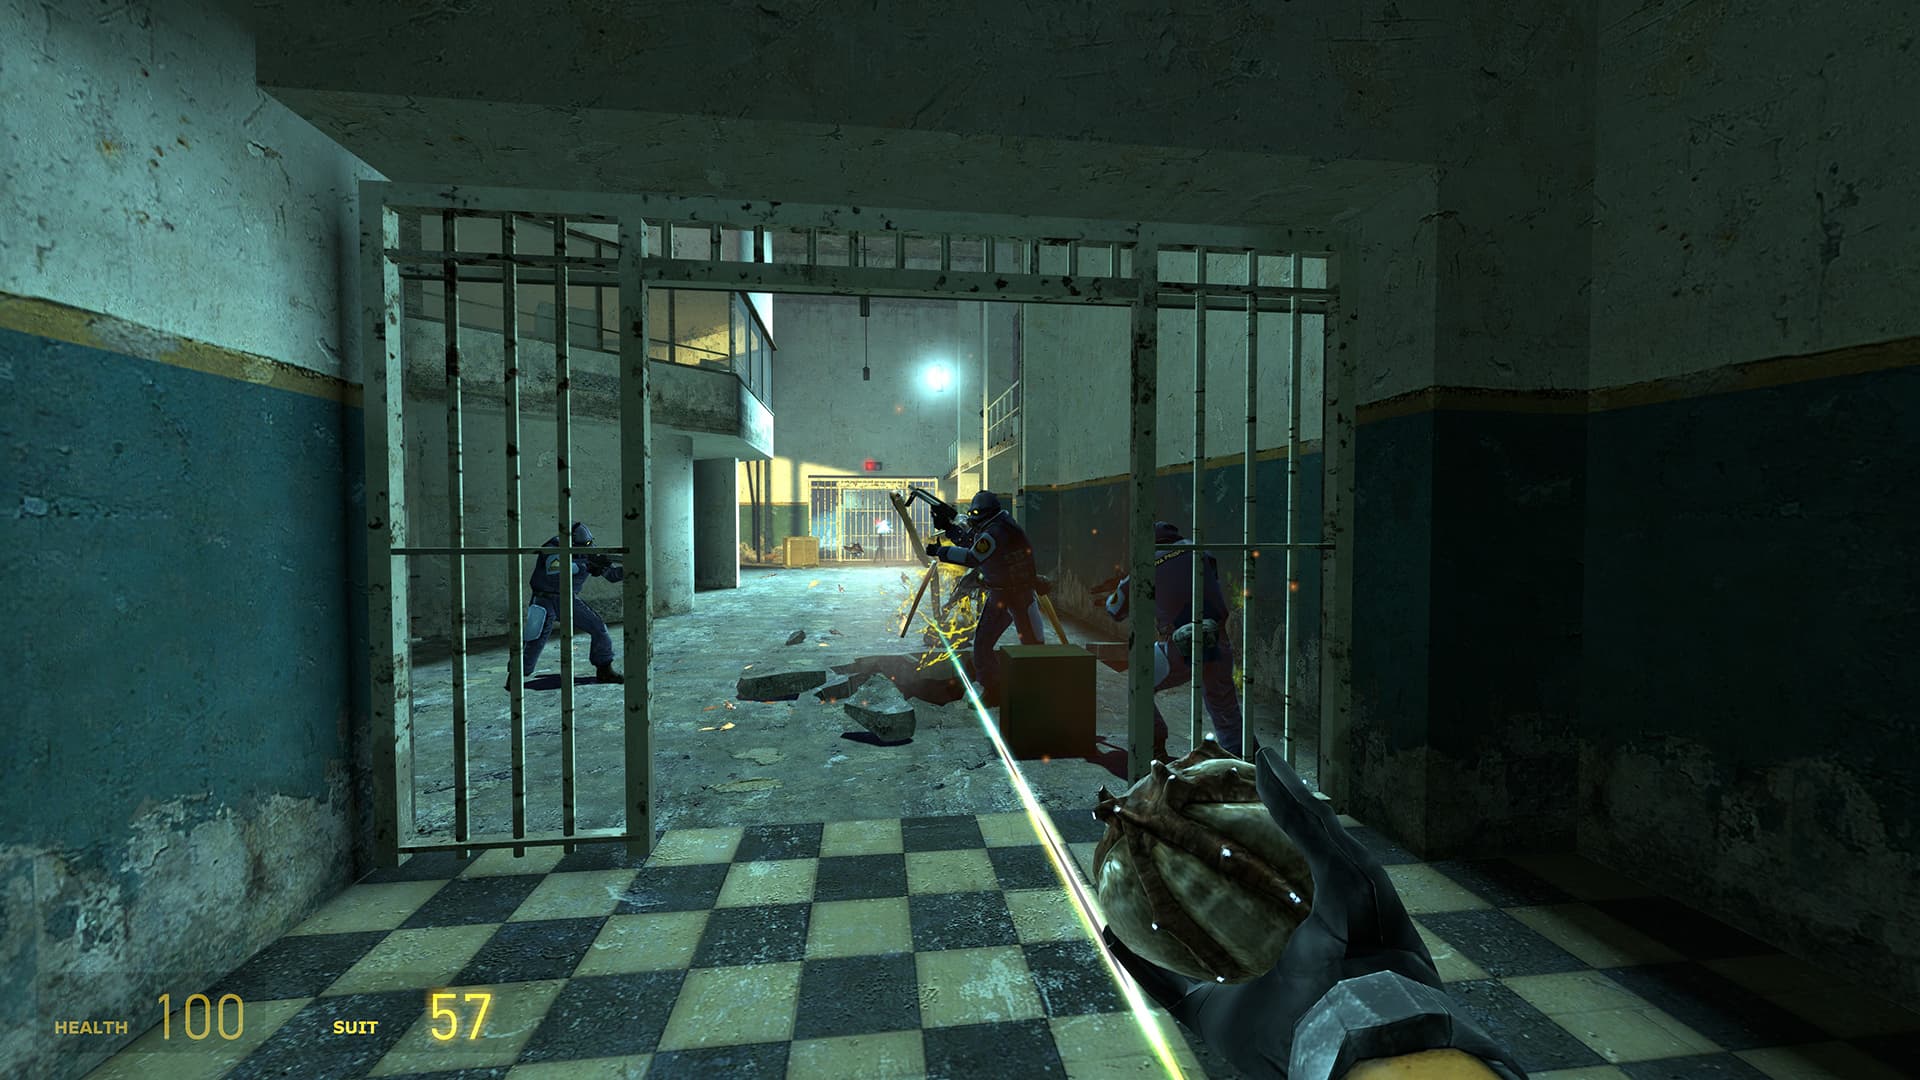 A screenshot from Half-Life 2. At Nova Prospekt, soldiers flank an antlion that's attacking another soldier while a sentry gun fires at the player, who is holding an antlion pheropod, a.k.a. bug bait.